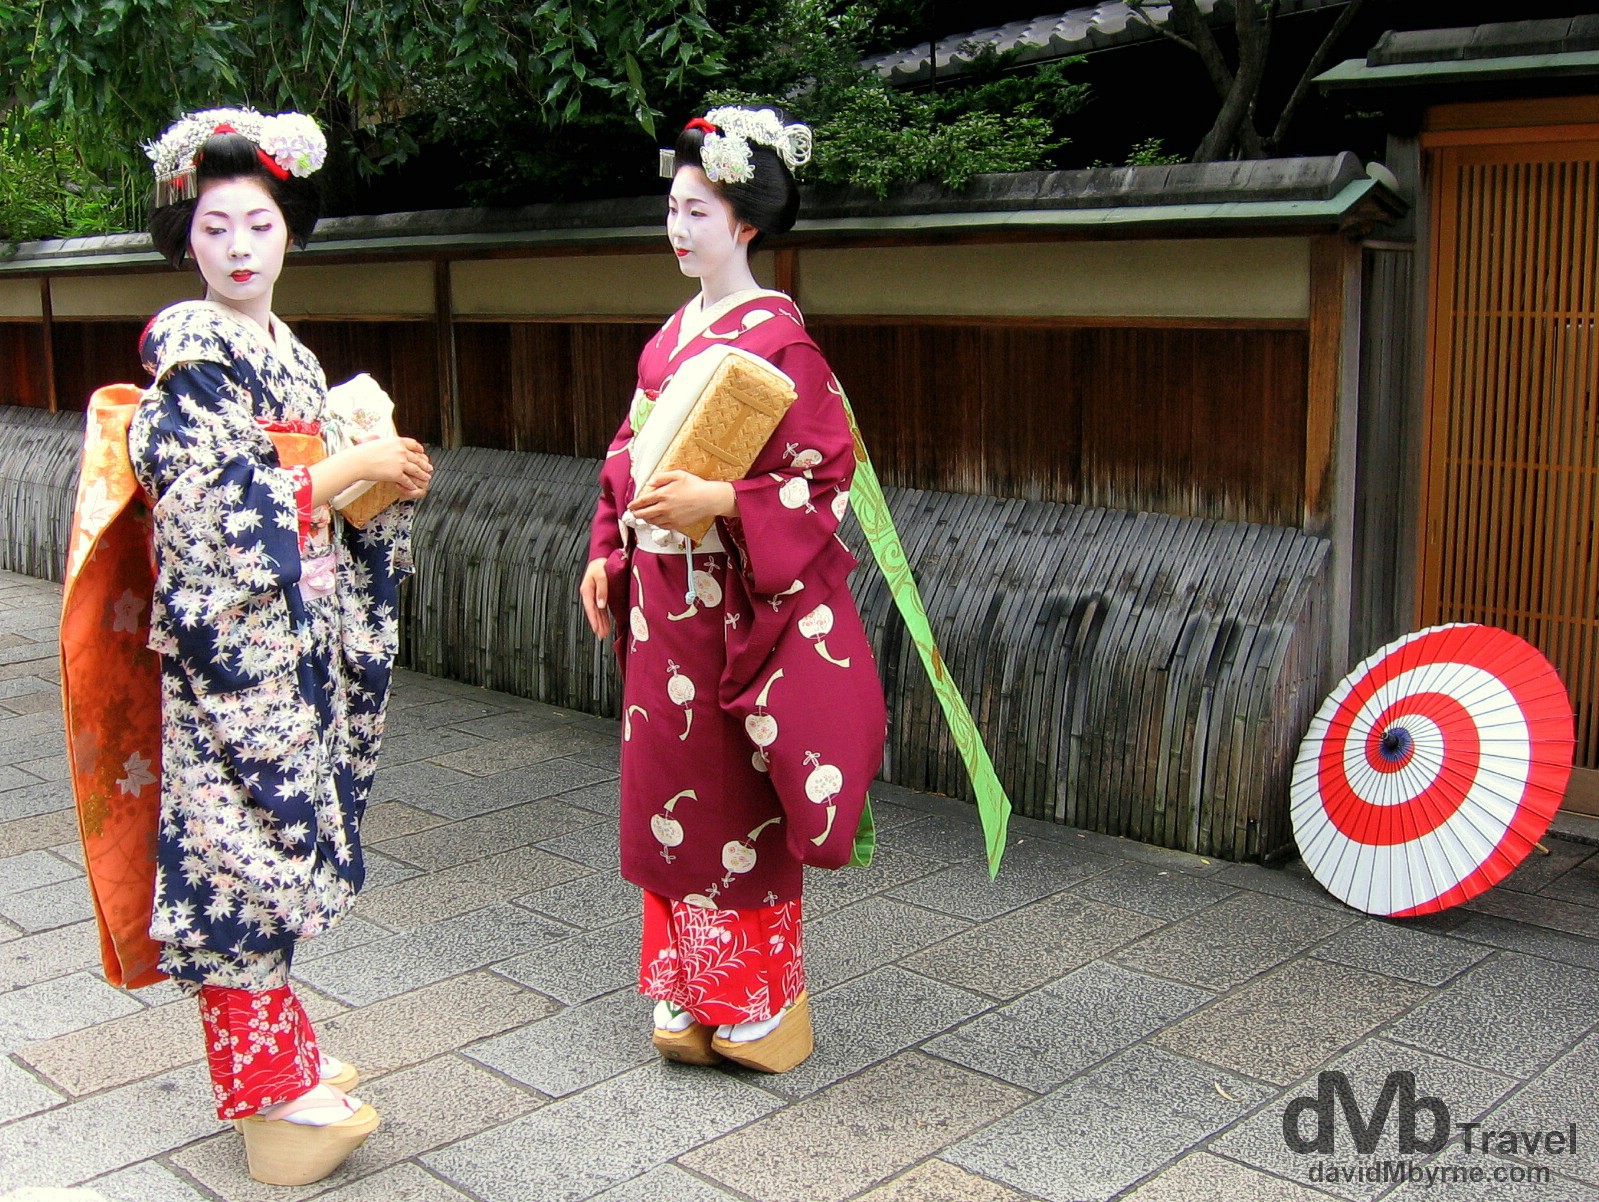 Maiko, trainee Geisha, on the streets of the Gion district of Kyoto, Honshu, Japan. July 18th, 2005.